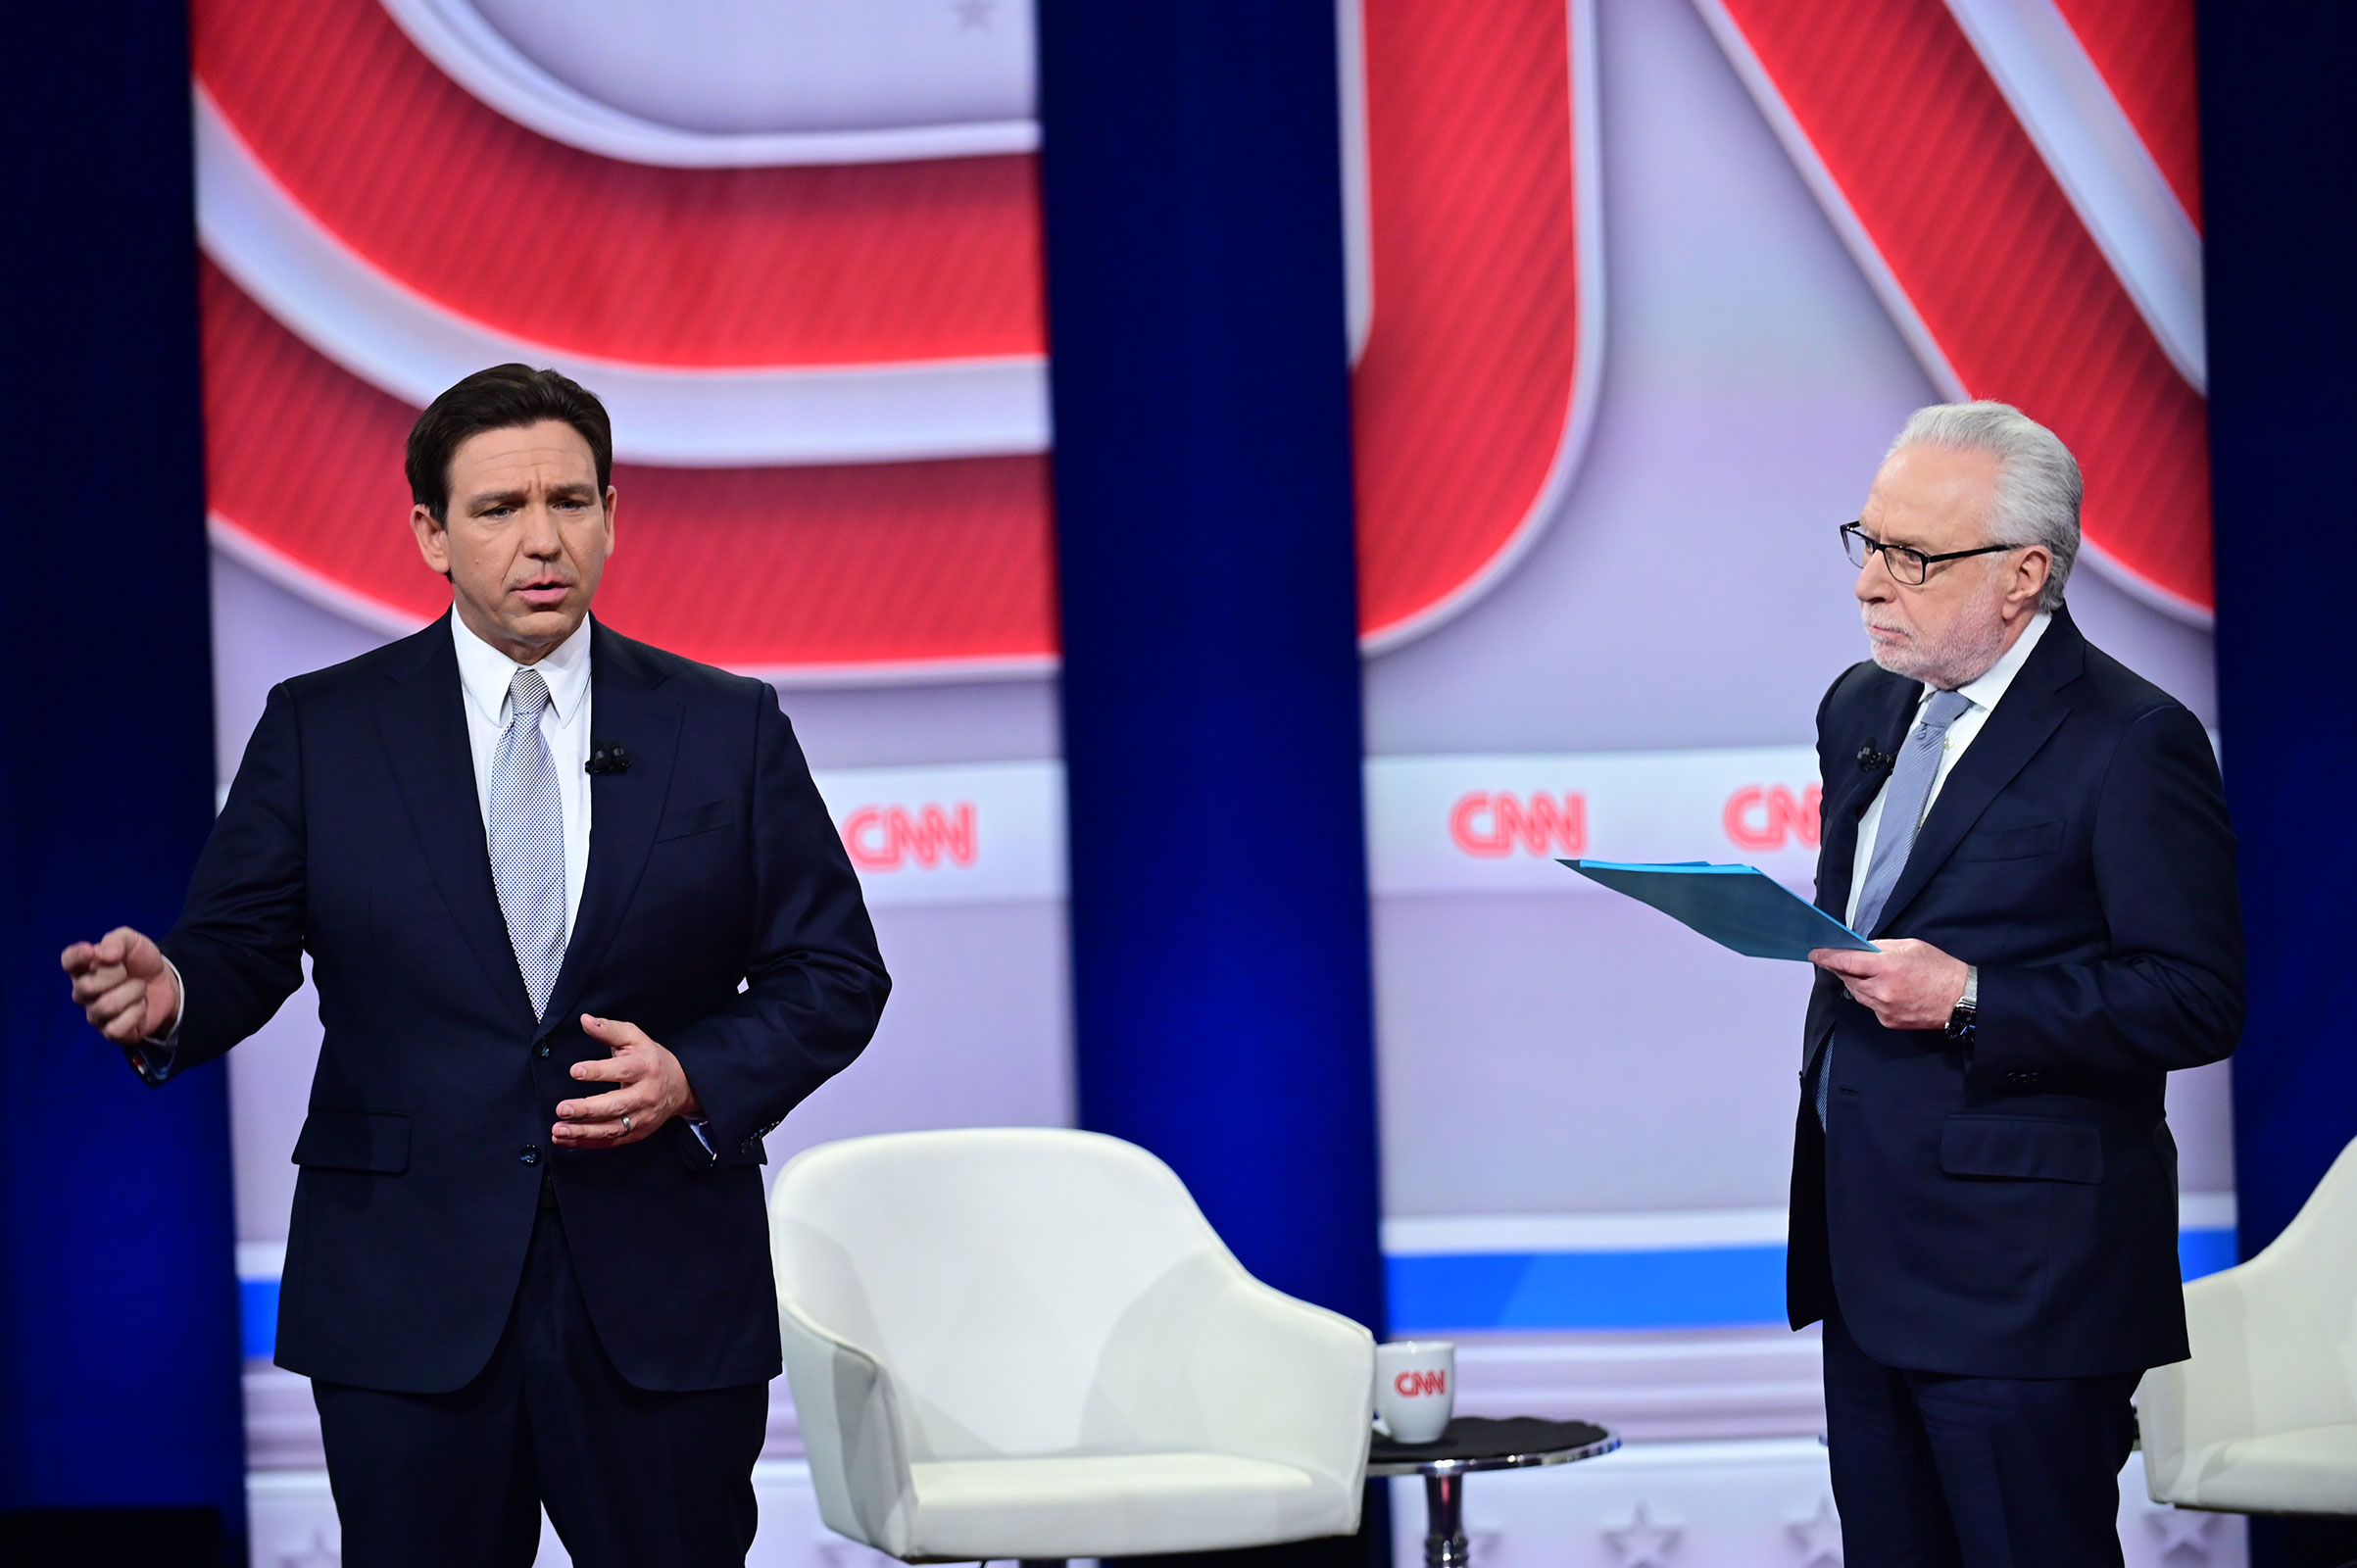 Florida Gov. Ron DeSantis participates in a CNN Republican Presidential Town Hall moderated by CNN’s Wolf Blitzer at New England College in Henniker, New Hampshire, on January 16, 2024.